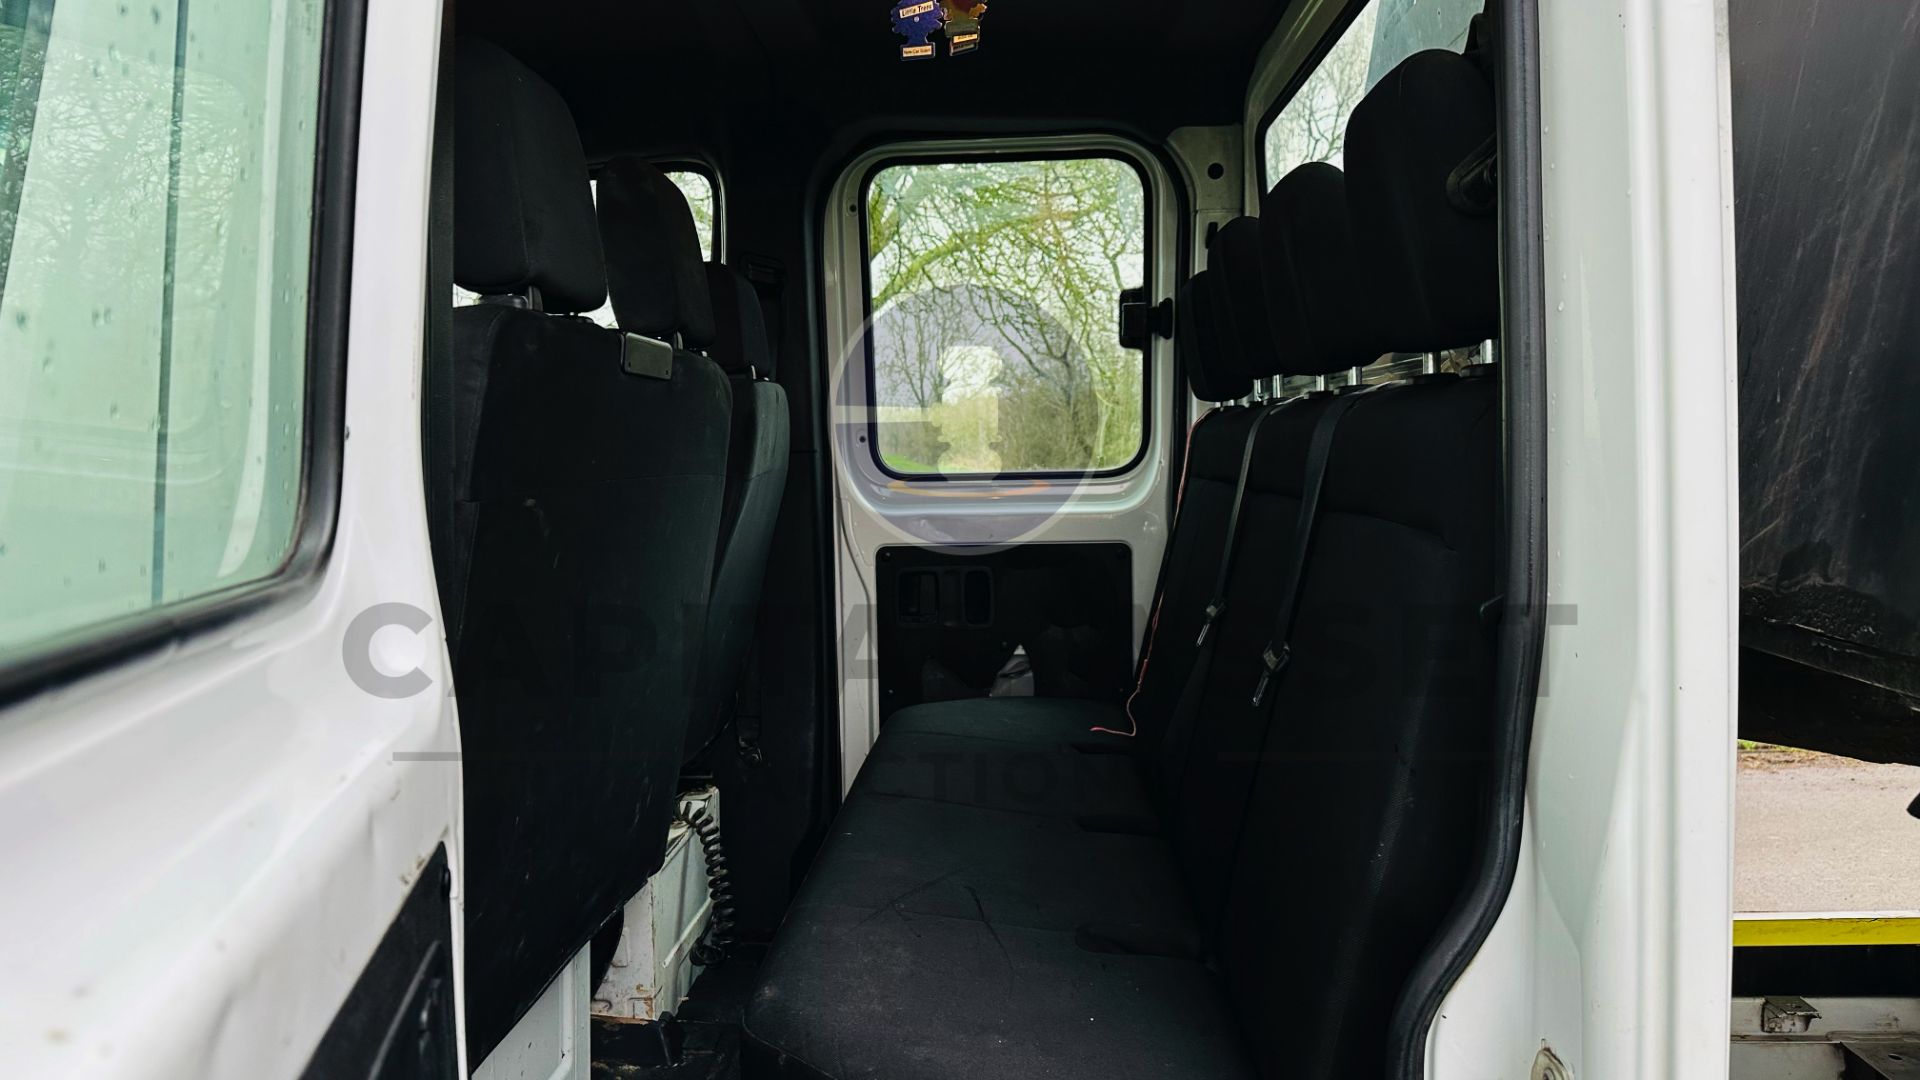 (On Sale) MERCEDES-BENZ SPRINTER 314 CDI *LWB - 7 SEATER D/CAB TIPPER* (2019 - NEW MODEL) *EURO 6* - Image 23 of 38